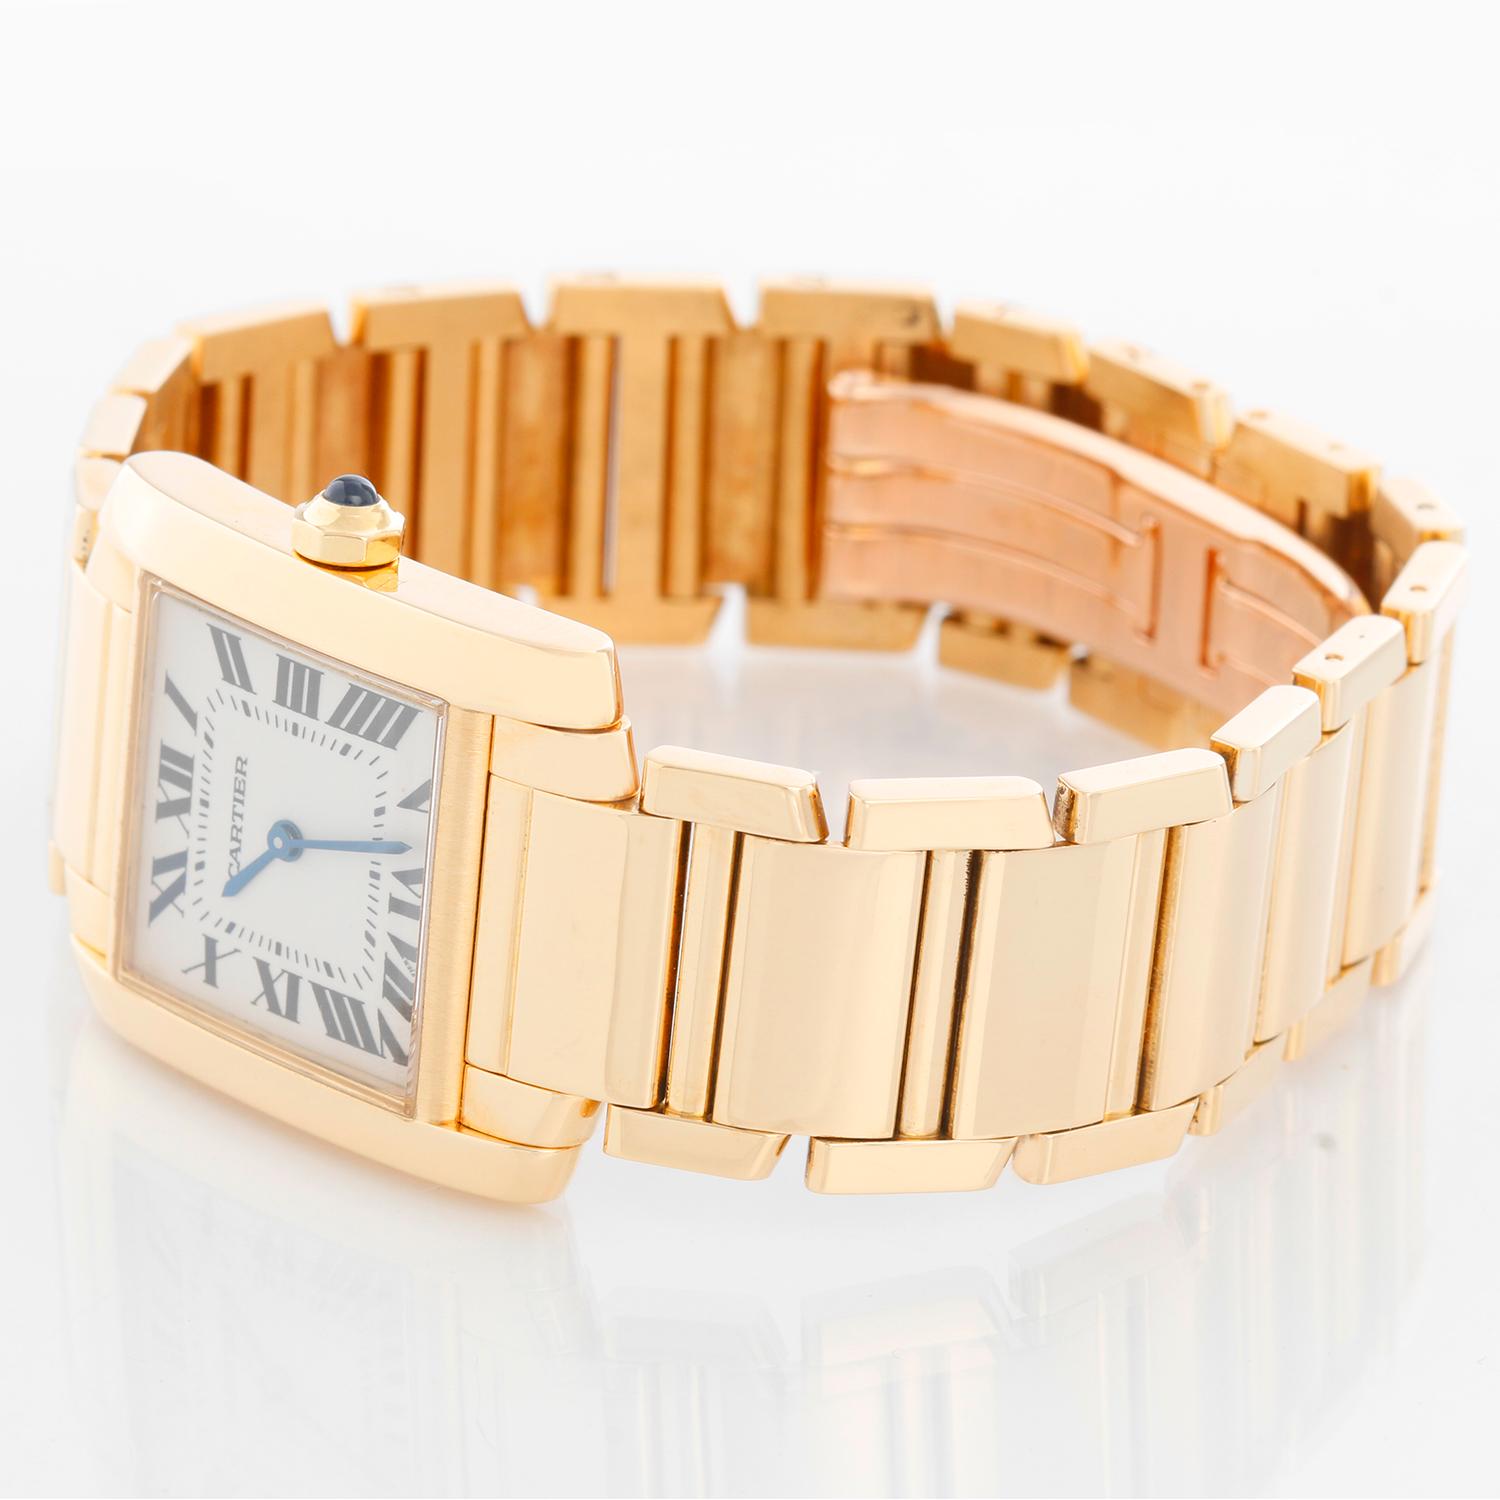 Cartier Tank Francaise Midsize 18k Yellow Gold Watch W50003N2 1821 - Quartz. 18k yellow gold  case; blue sapphire cabochon crown (25mm x 30mm). Ivory colored dial with black Roman numerals. Cartier 18k yellow gold bracelet. Pre-owned with Cartier